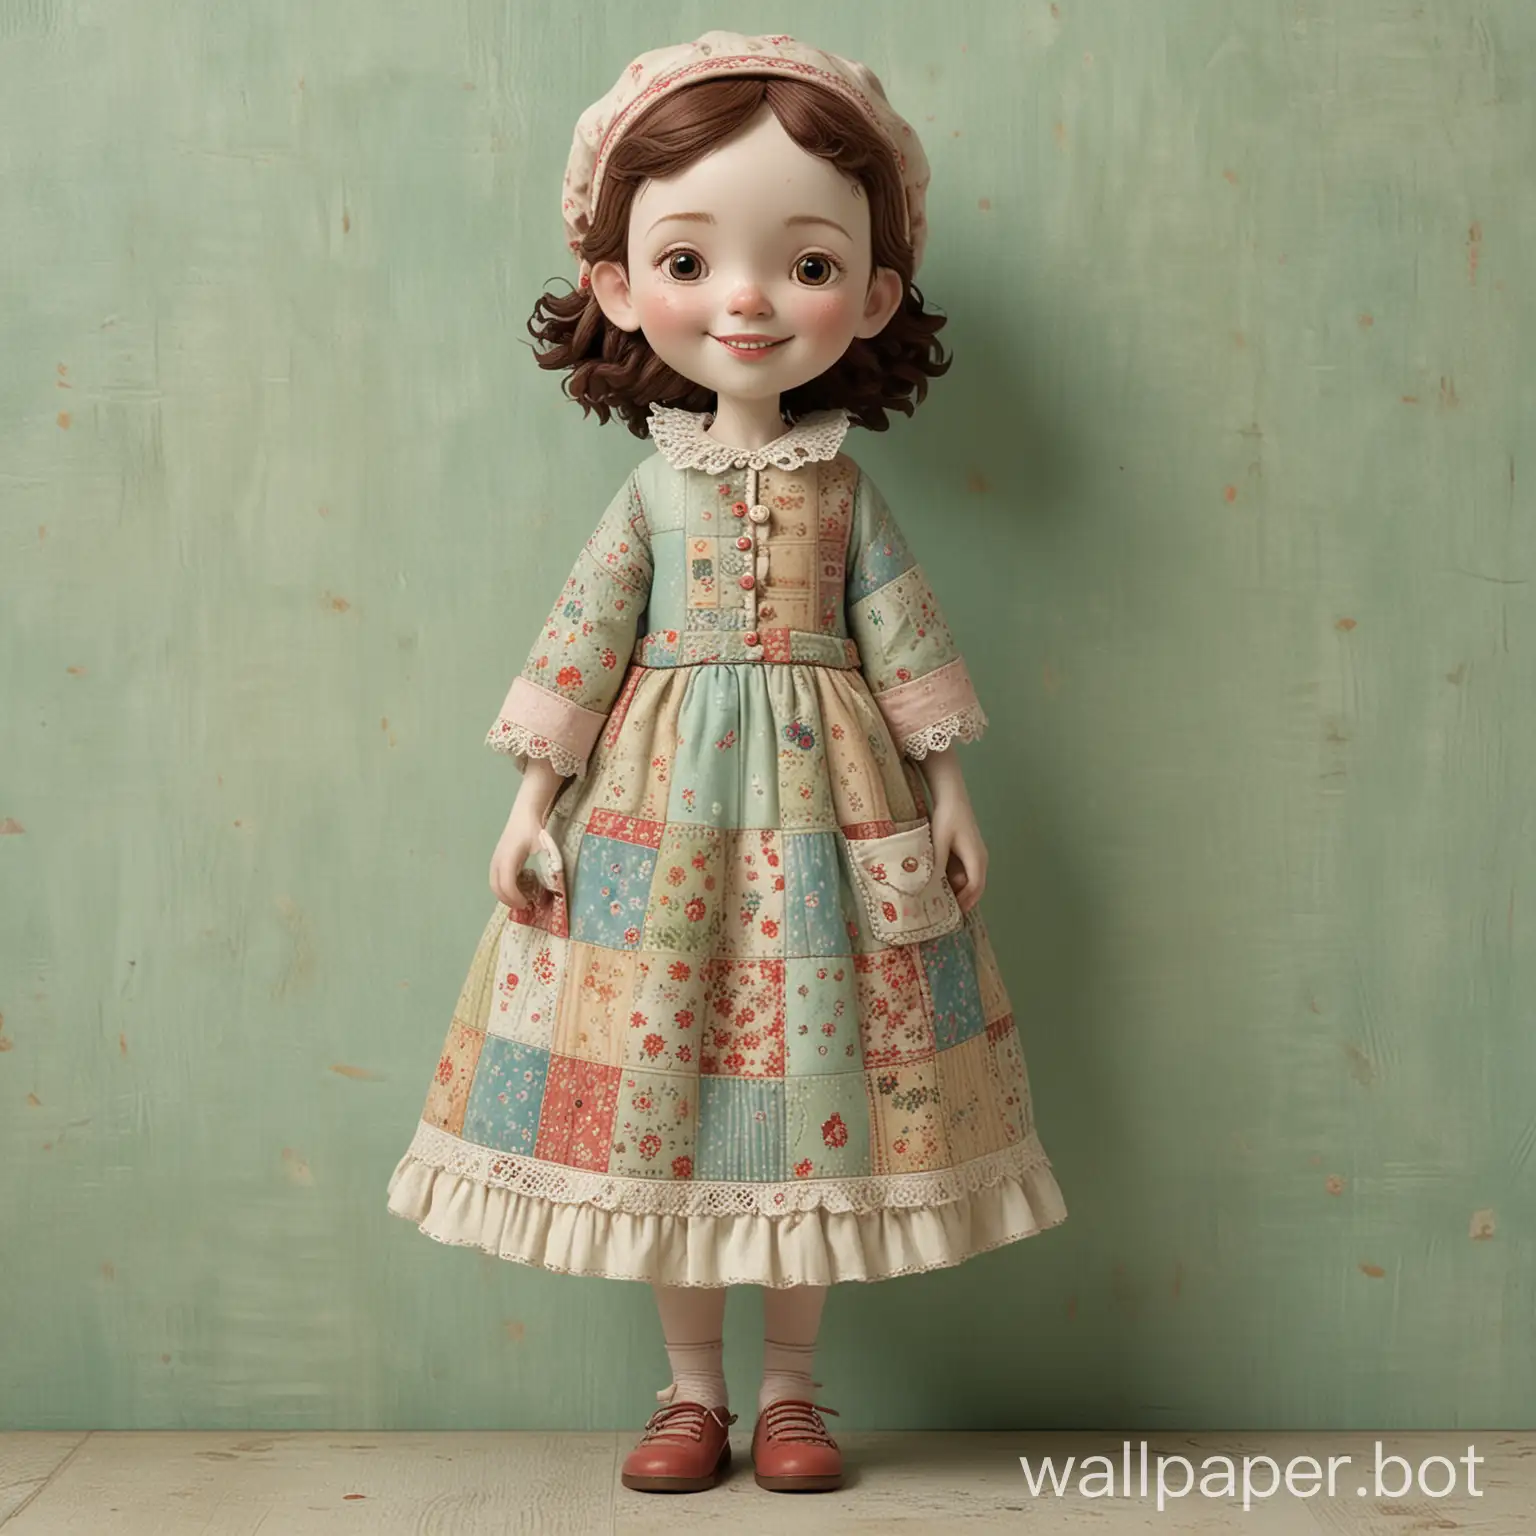 Cheerful-Freckled-Girl-in-Patchwork-Attire-on-Mint-Distressed-Background